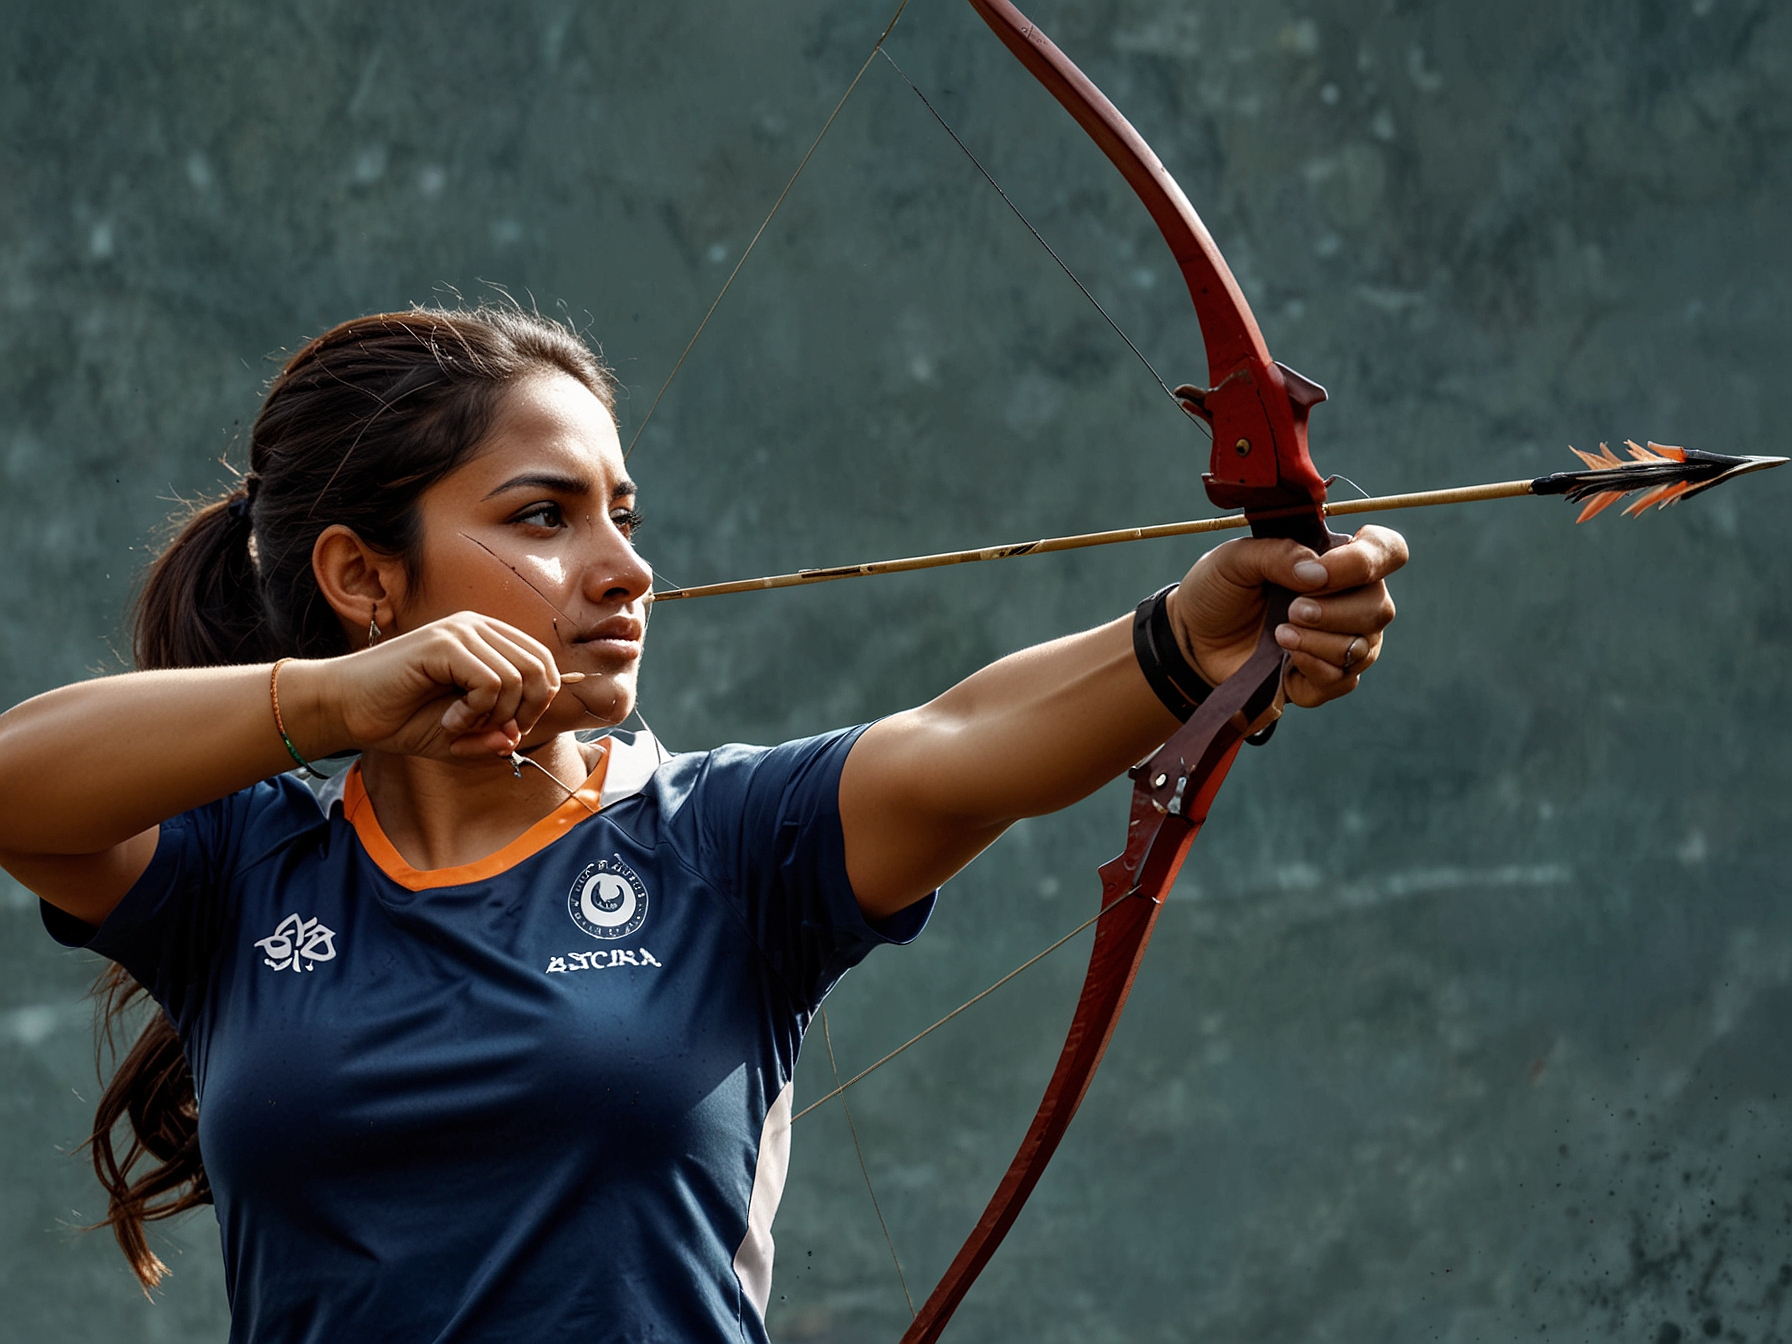 Ankita Bhakat releasing an arrow during a tense archery match, demonstrating her precision and composure which helped her secure an Olympic quota for Paris 2024.